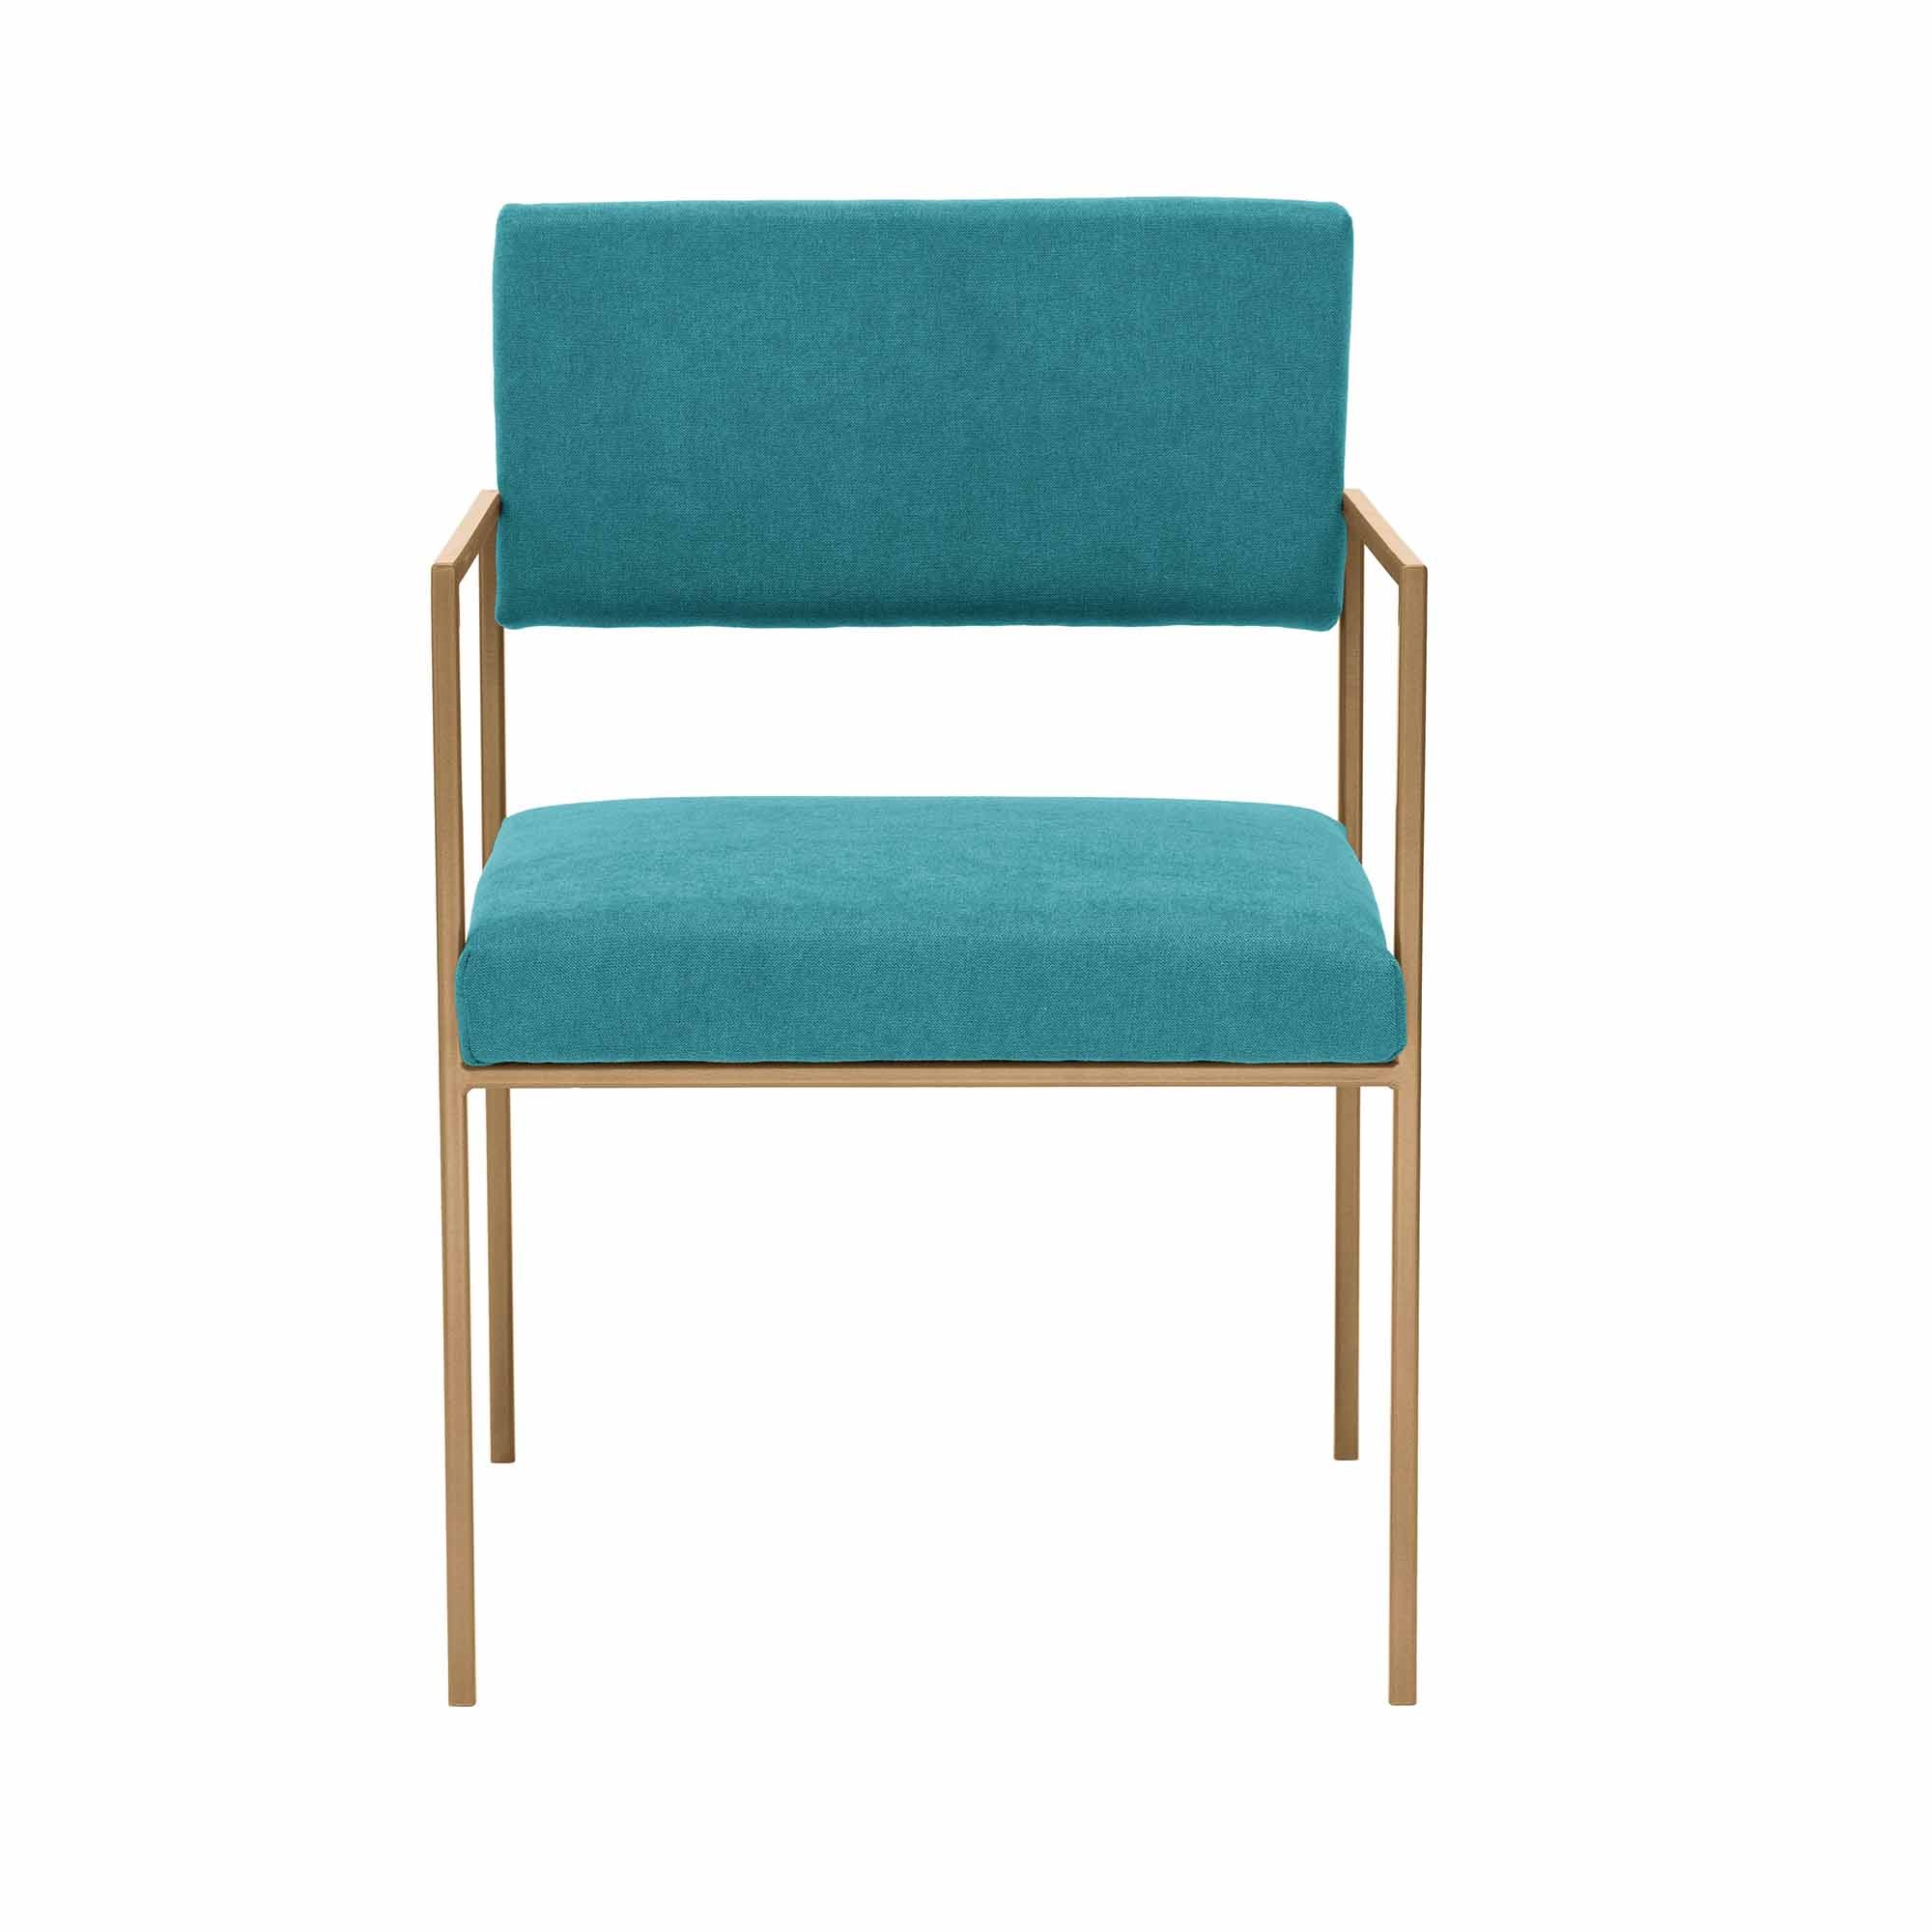 CUBE Armchair, Powder-Coated Steel Frame front view blue fabric, yellow frame